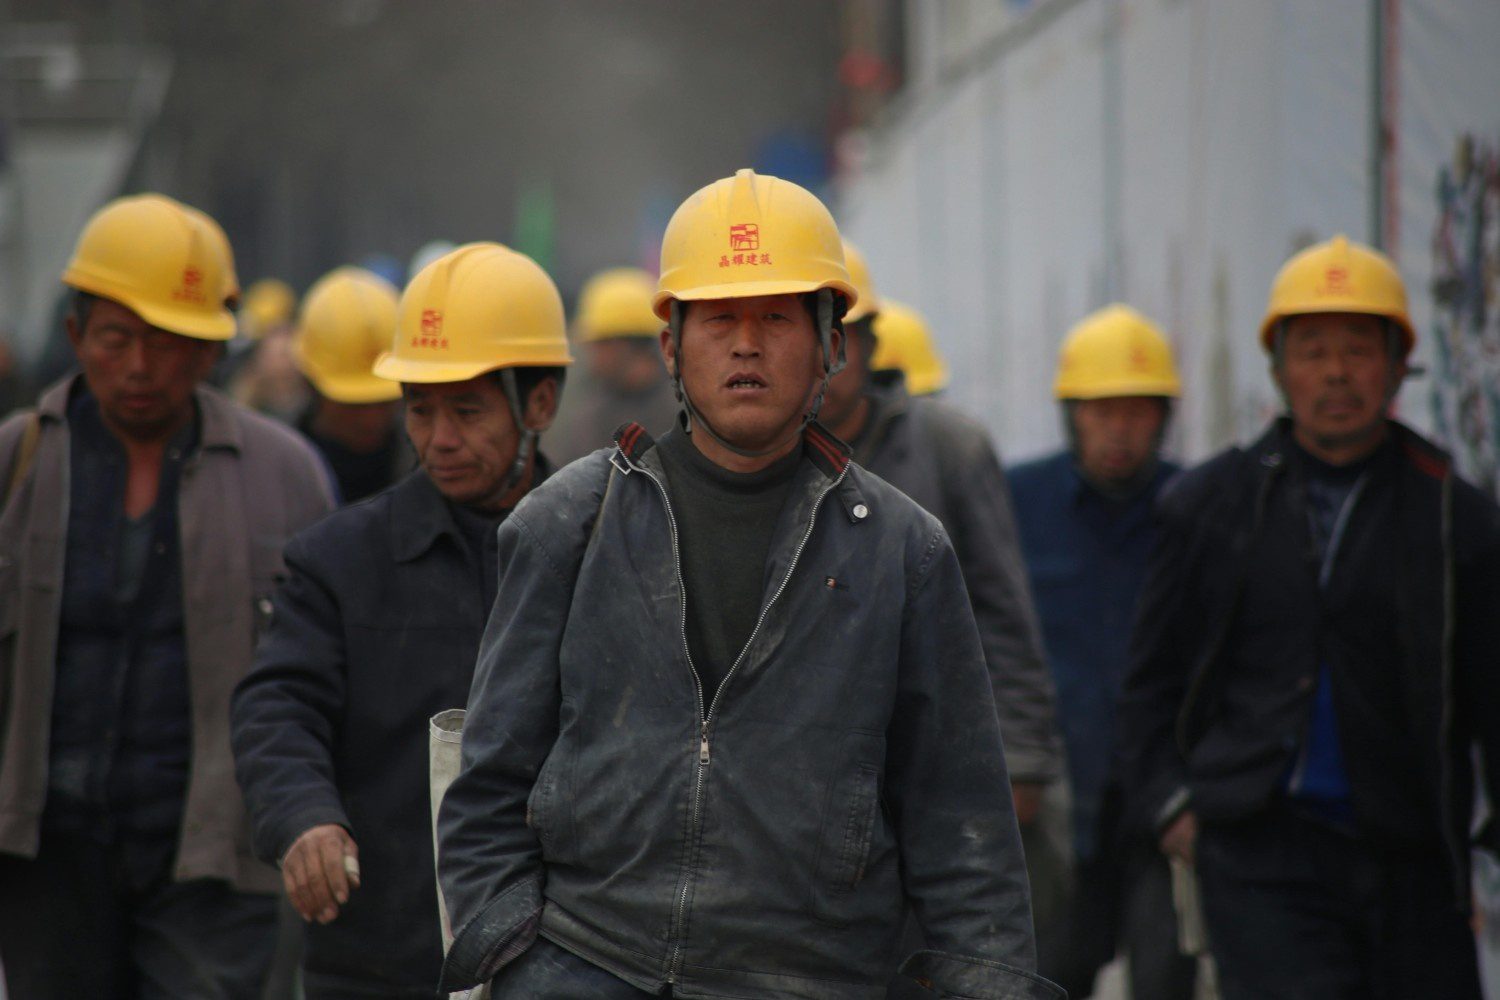 a group of men wearing yellow hard hats